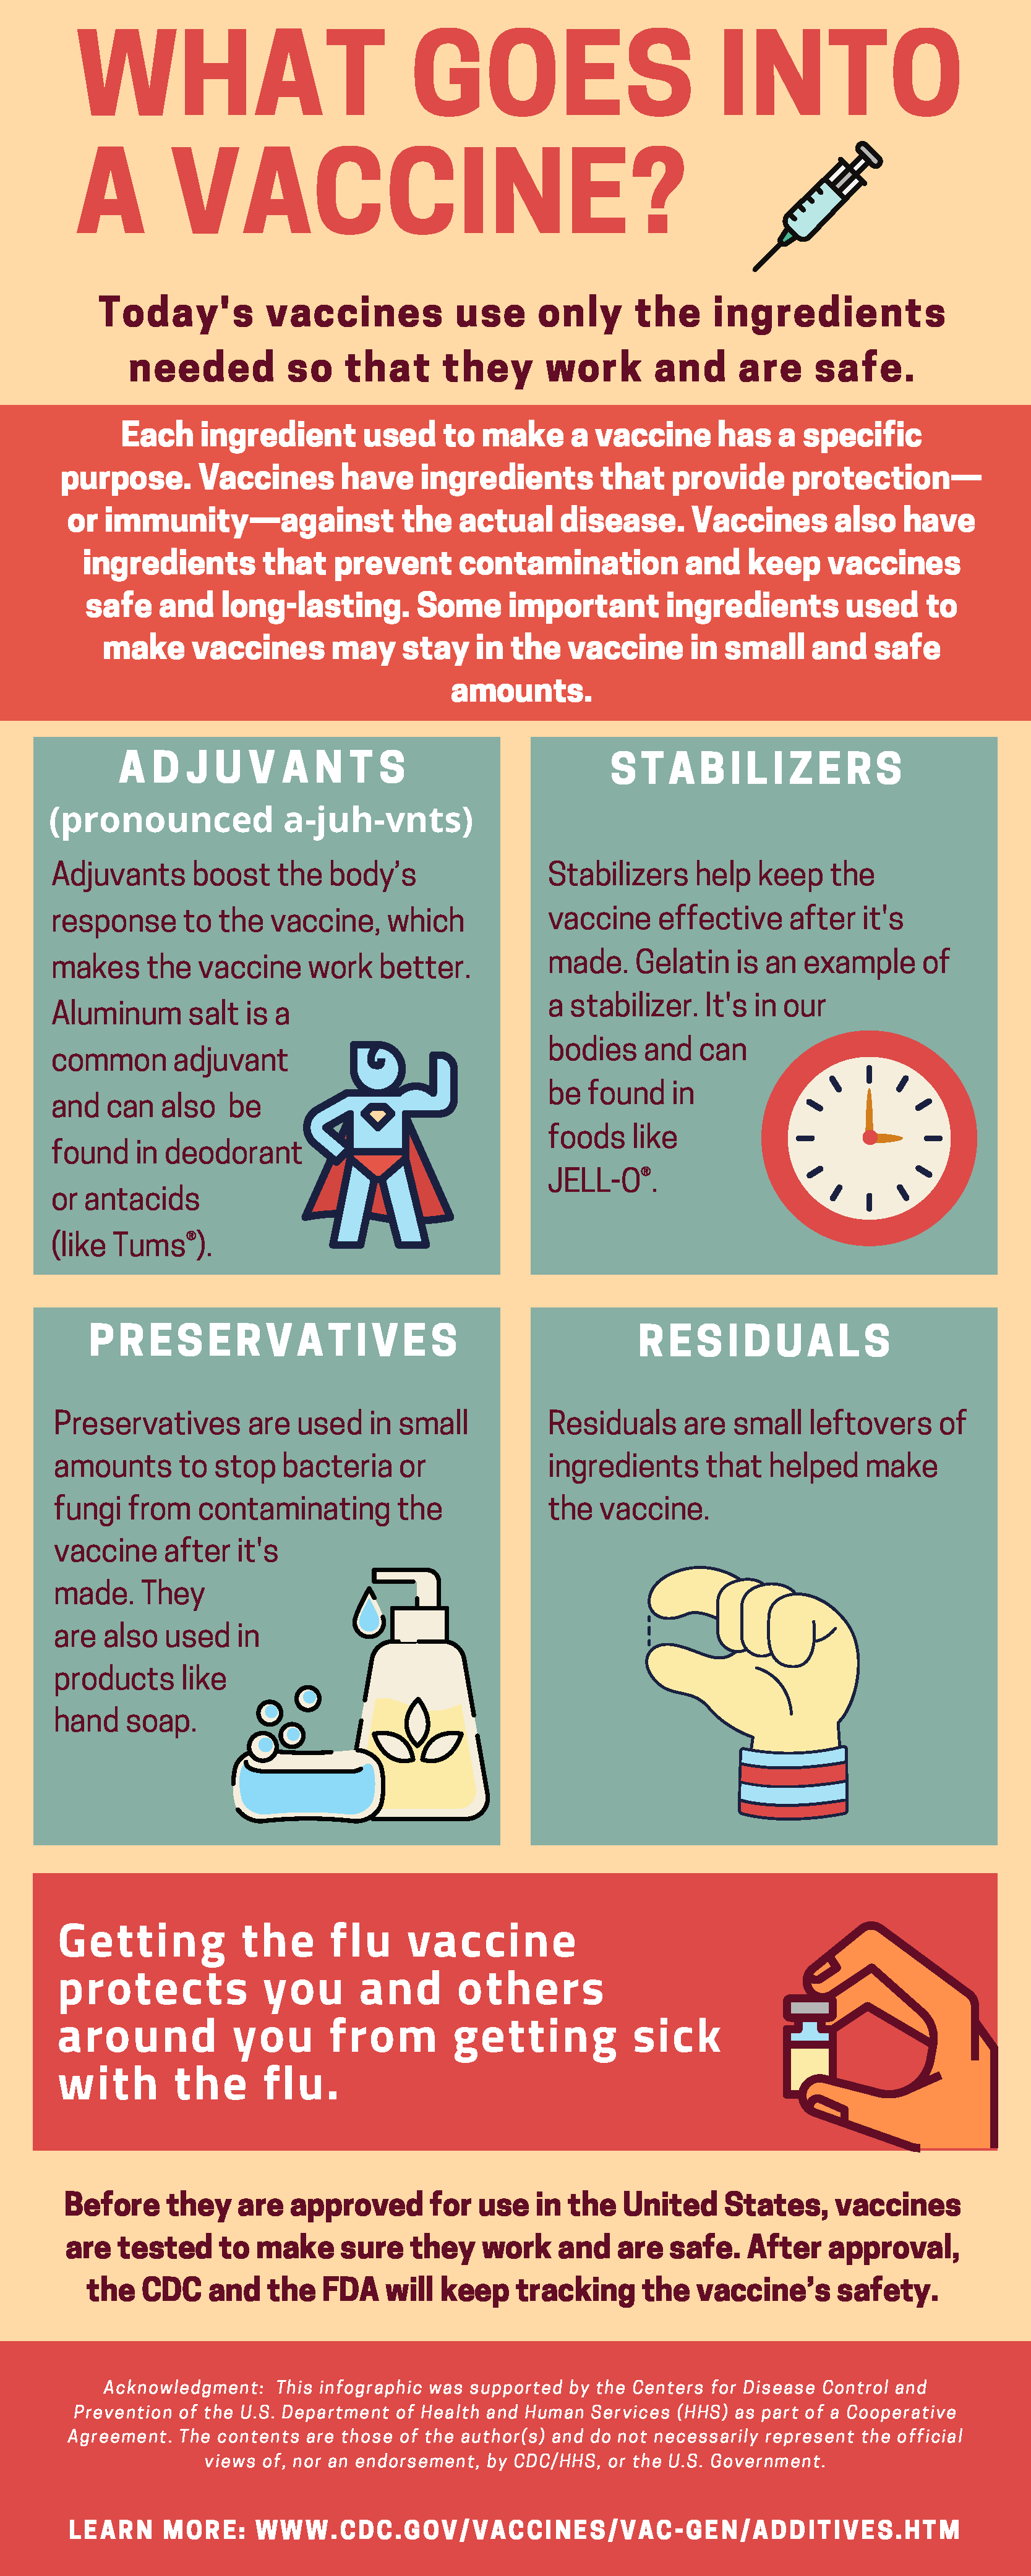 What goes into a vaccine factsheet provides information on important ingredients that are used in vaccines.